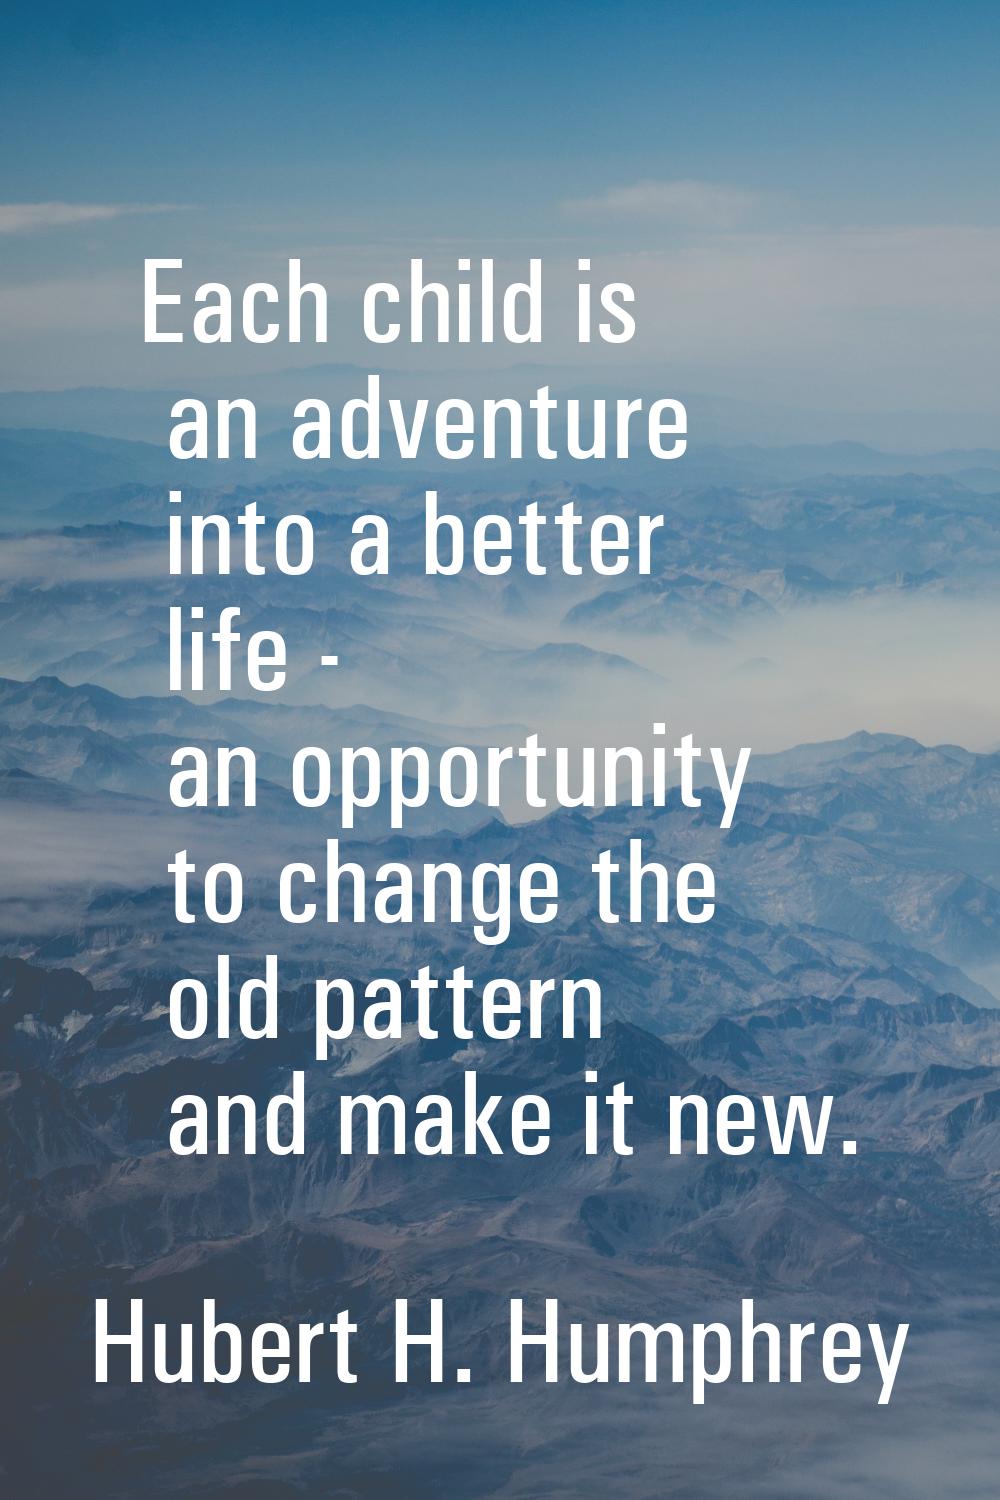 Each child is an adventure into a better life - an opportunity to change the old pattern and make i